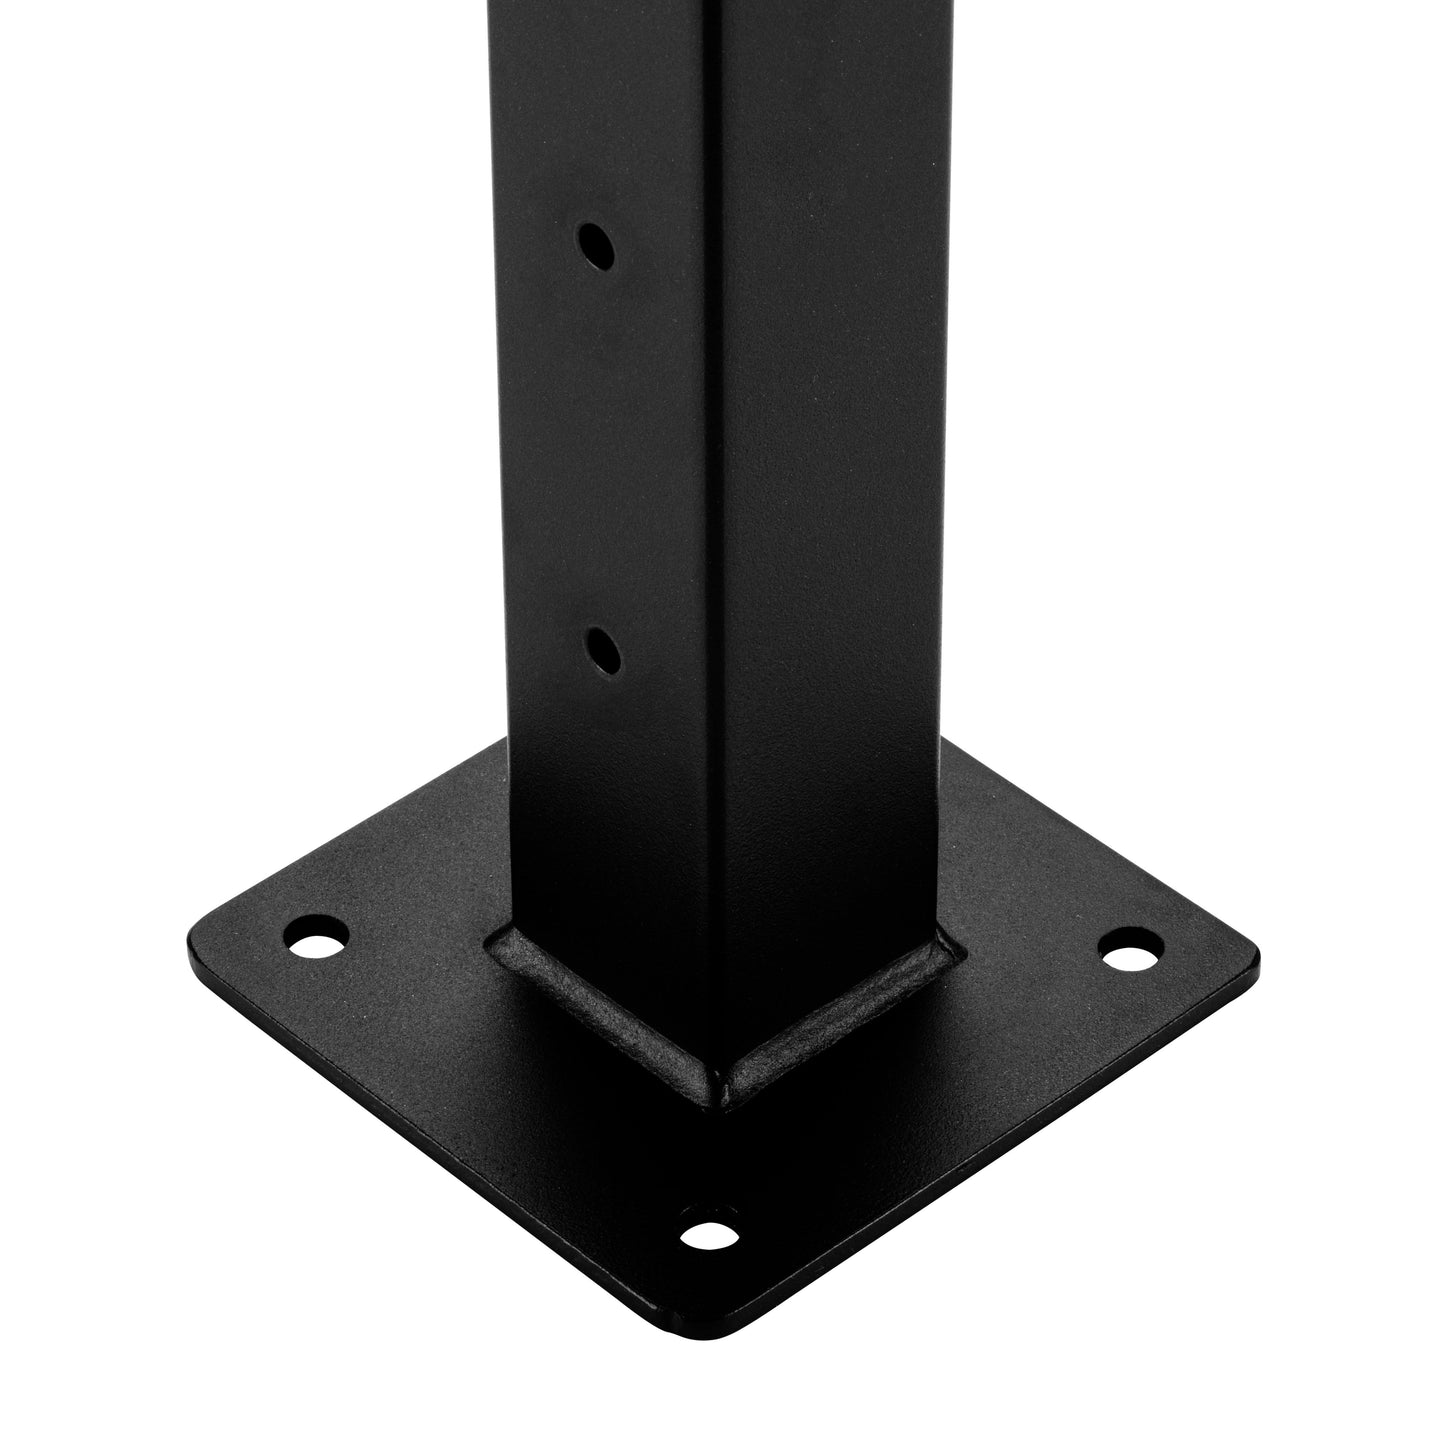 33 ft. x 42 in. Black Deck Cable Railing, Base Mount